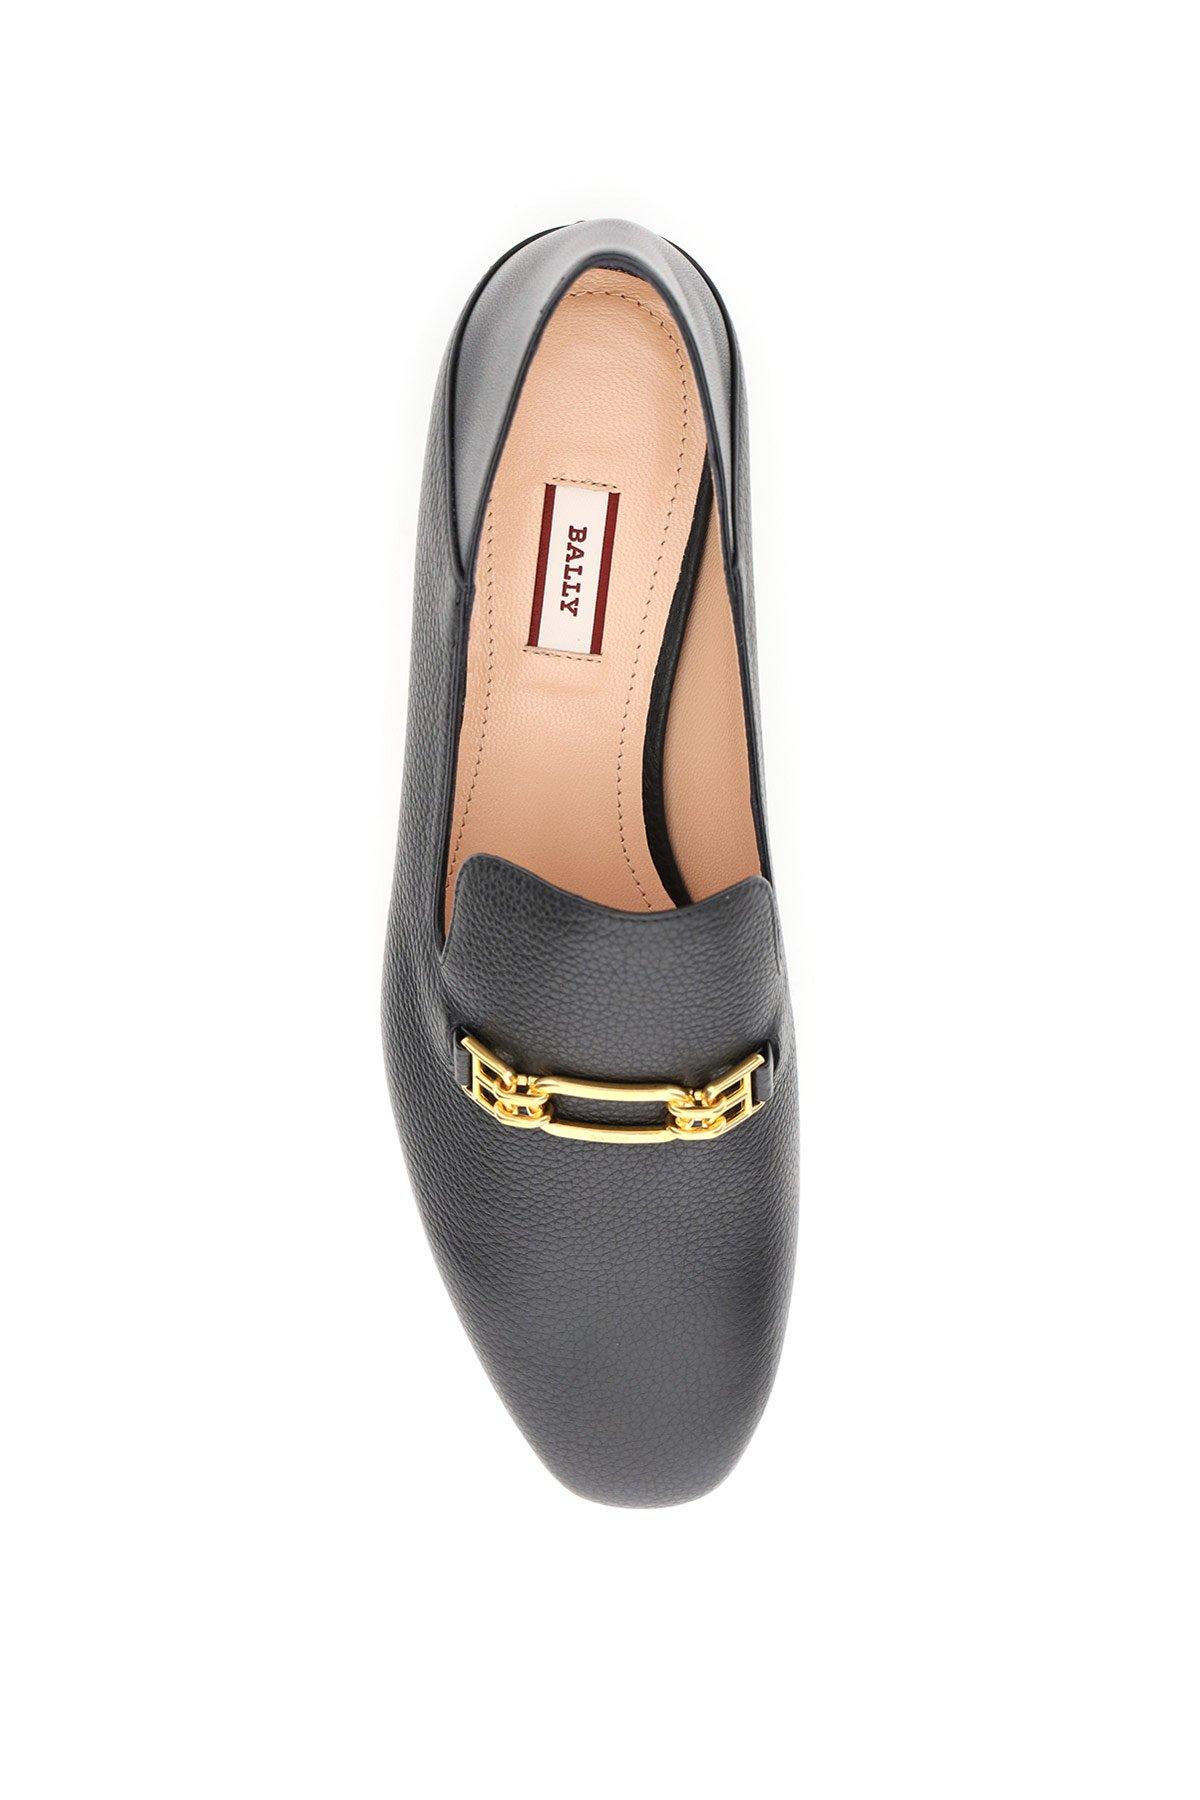 Bally Darcie 1851 Loafers in Black | Lyst